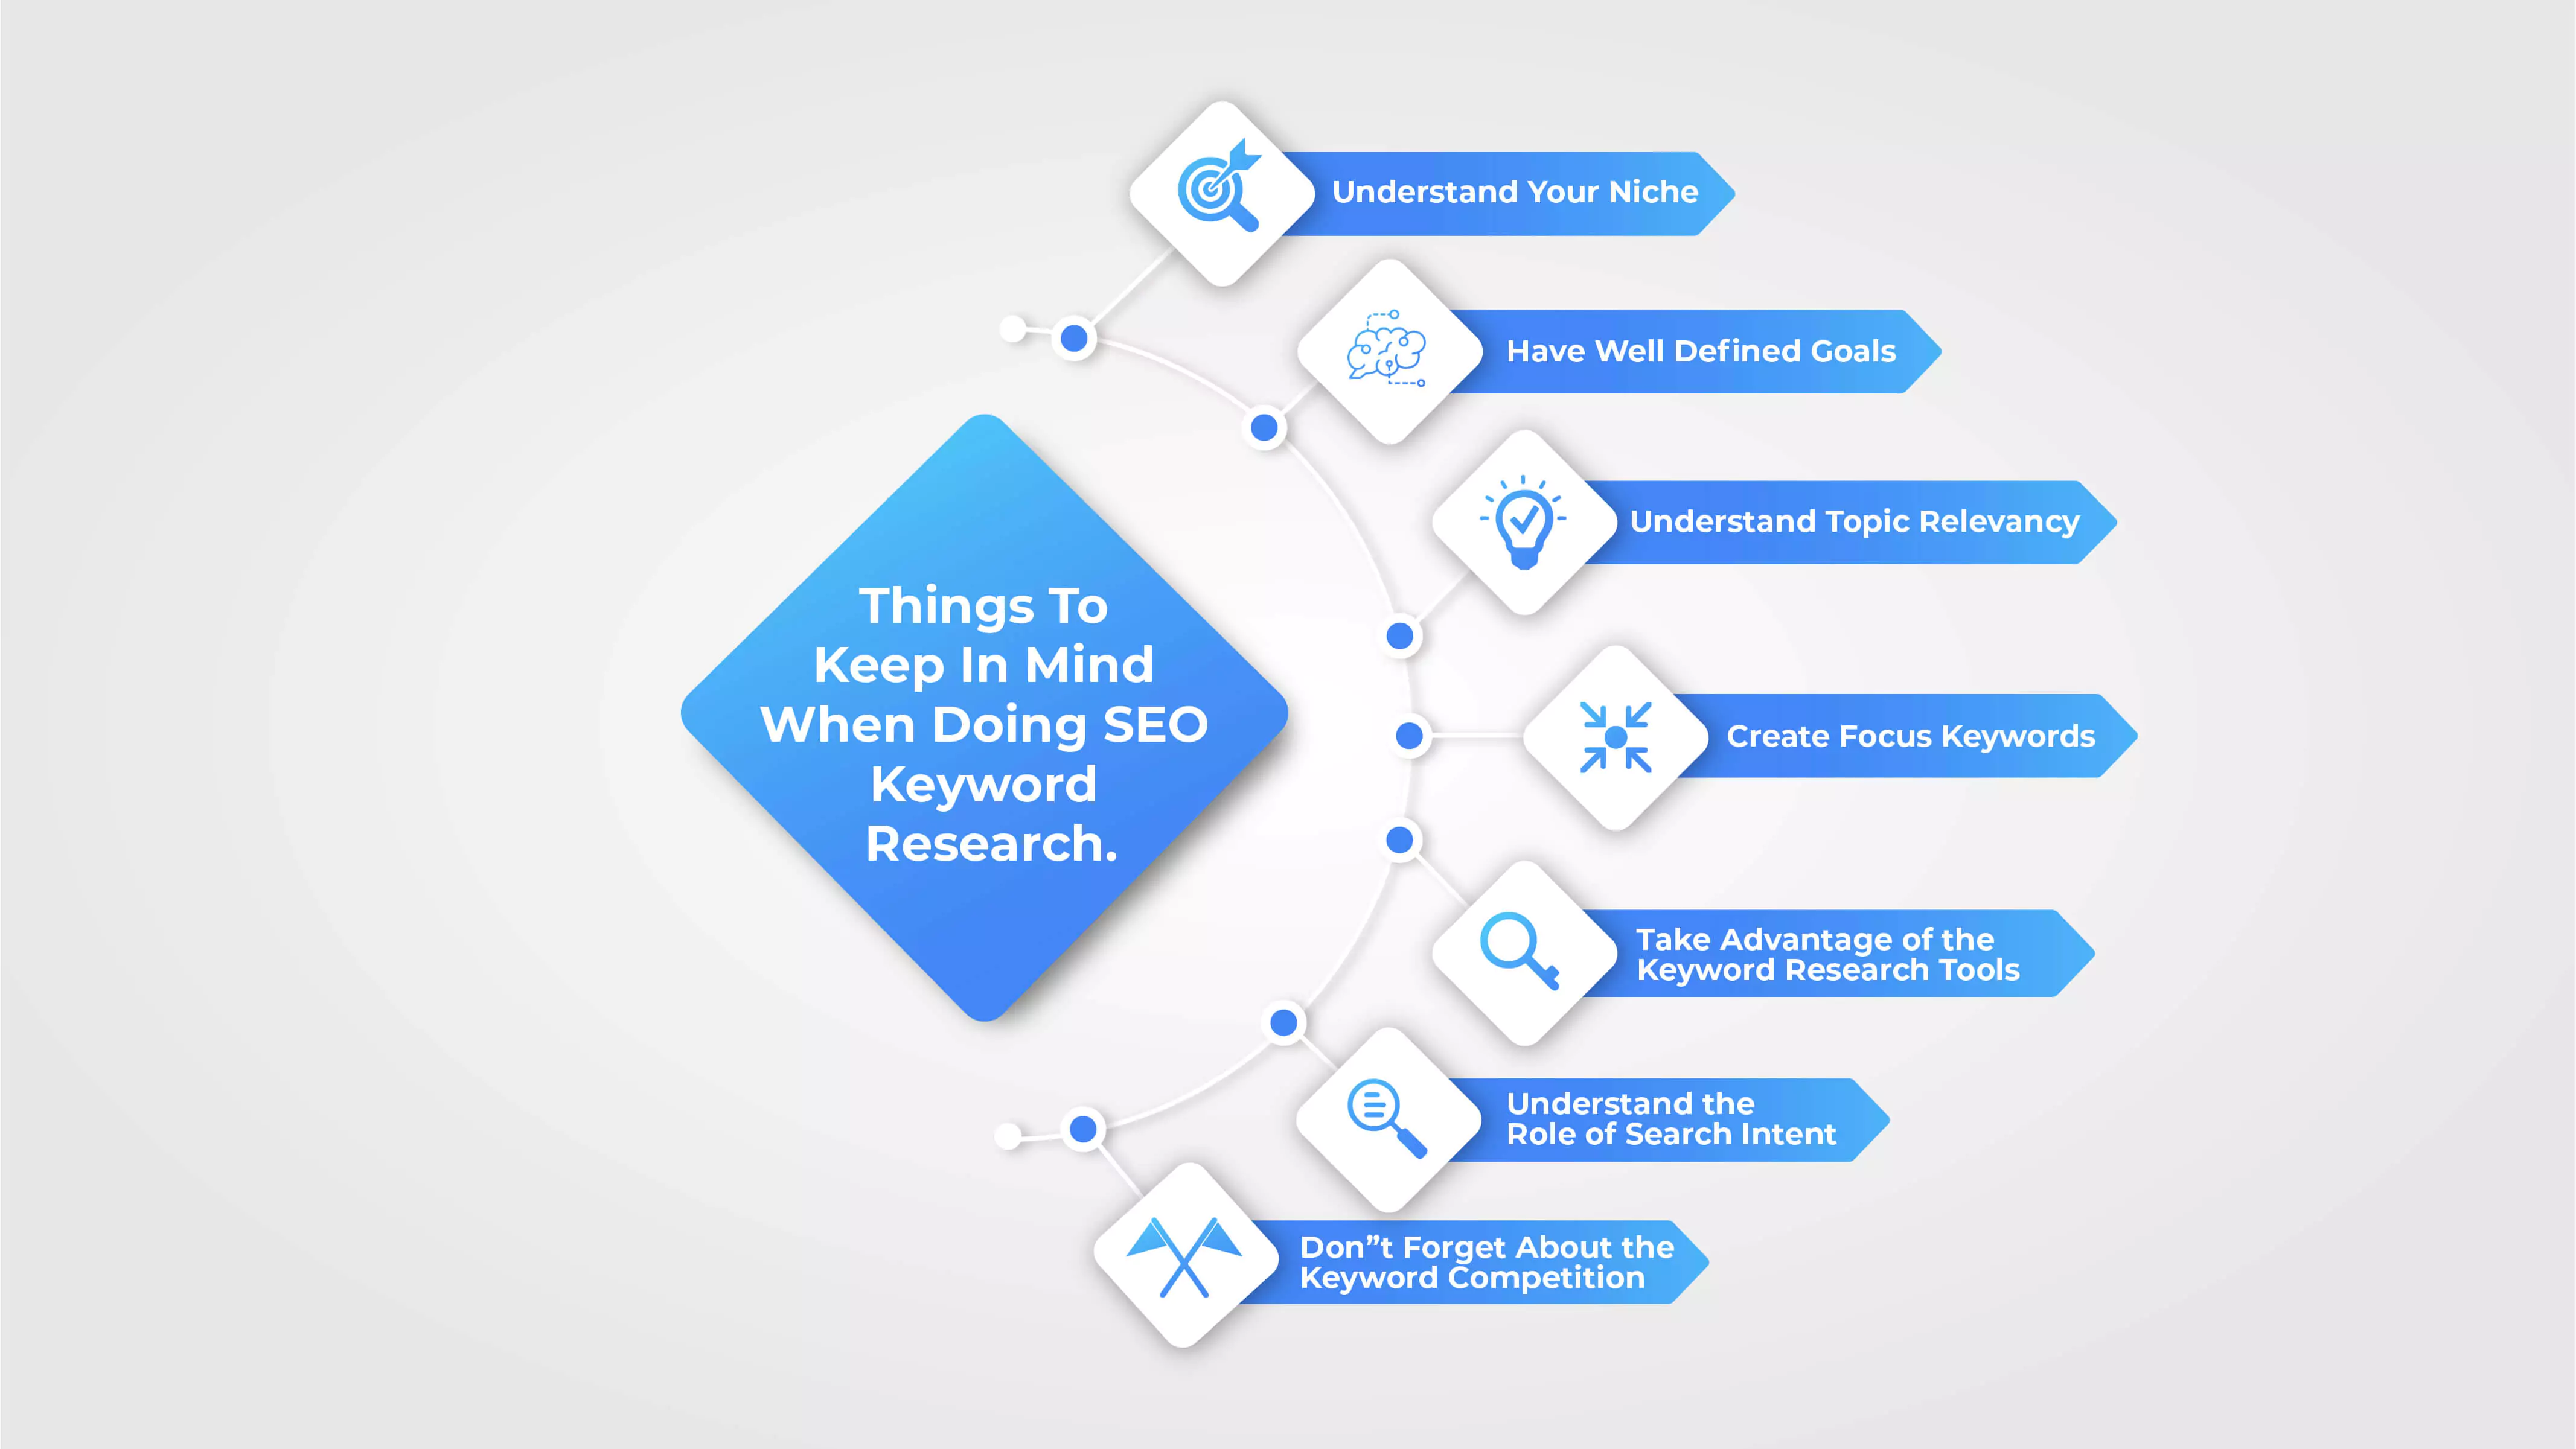 Things to Keep in Mind When Looking for the Best SEO Focus Keyword